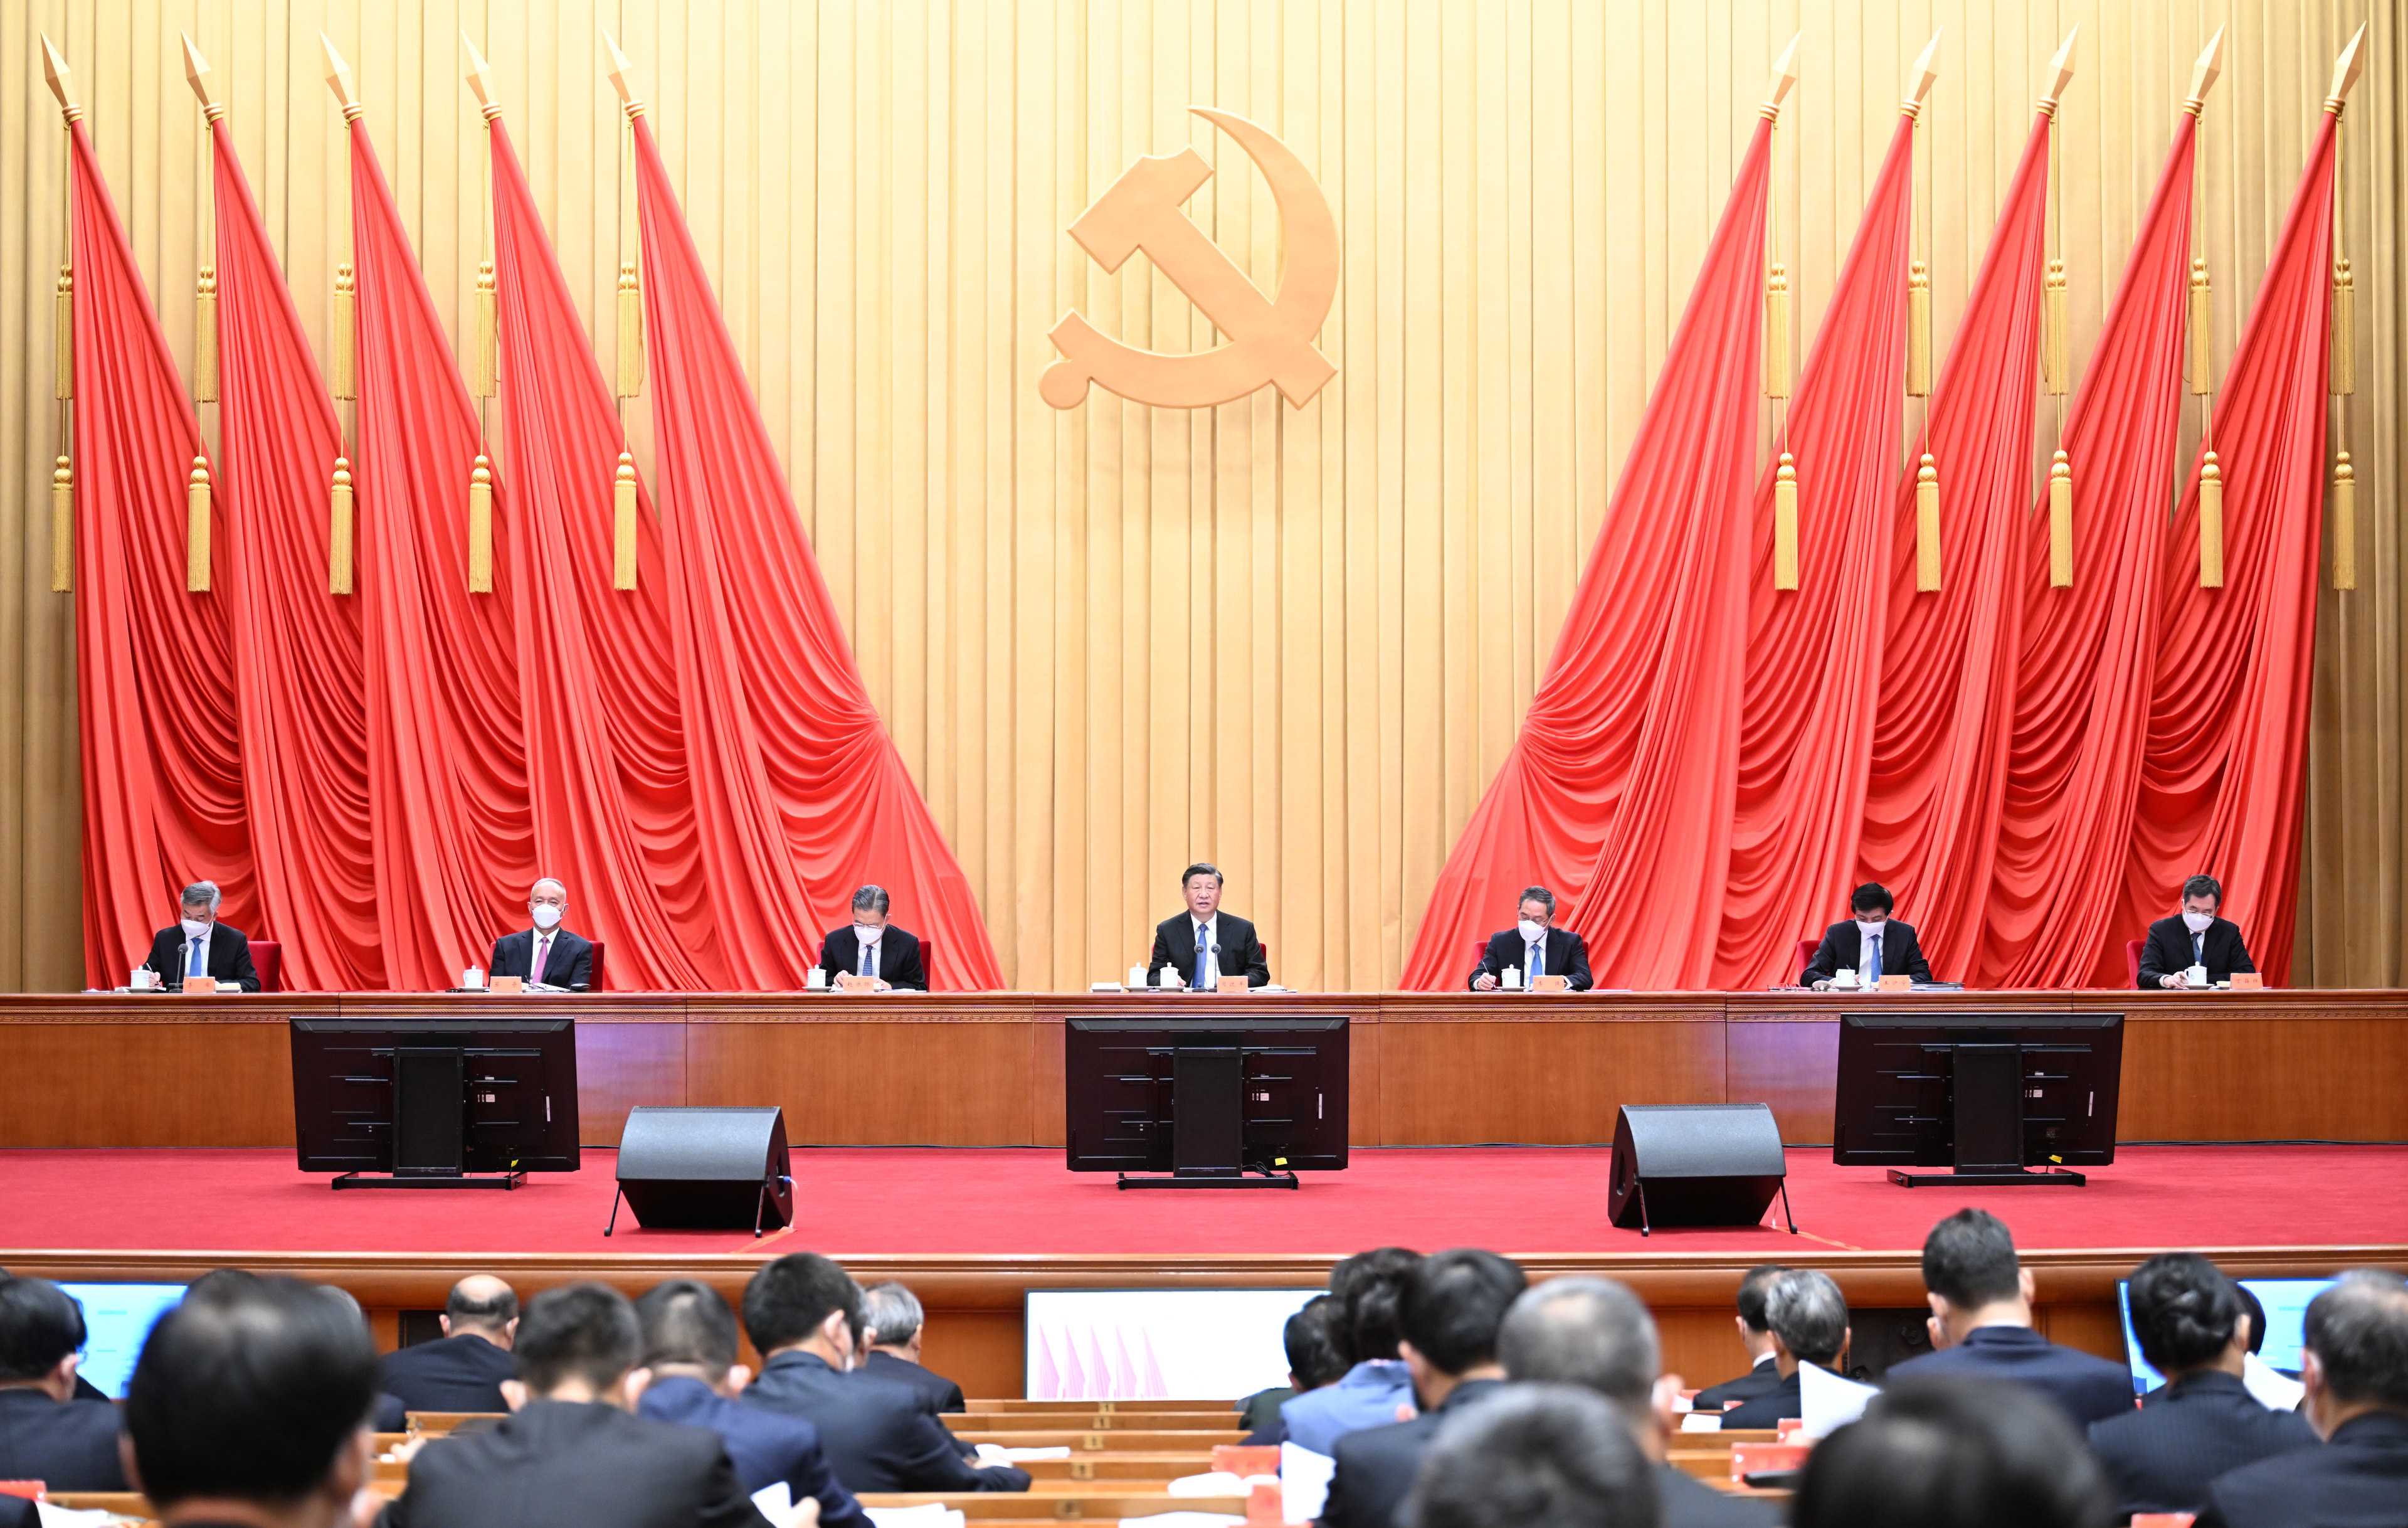 The upcoming third plenum is a highly anticipated meeting of the Communist Party of China’s Central Committee. Photo: Xinhua